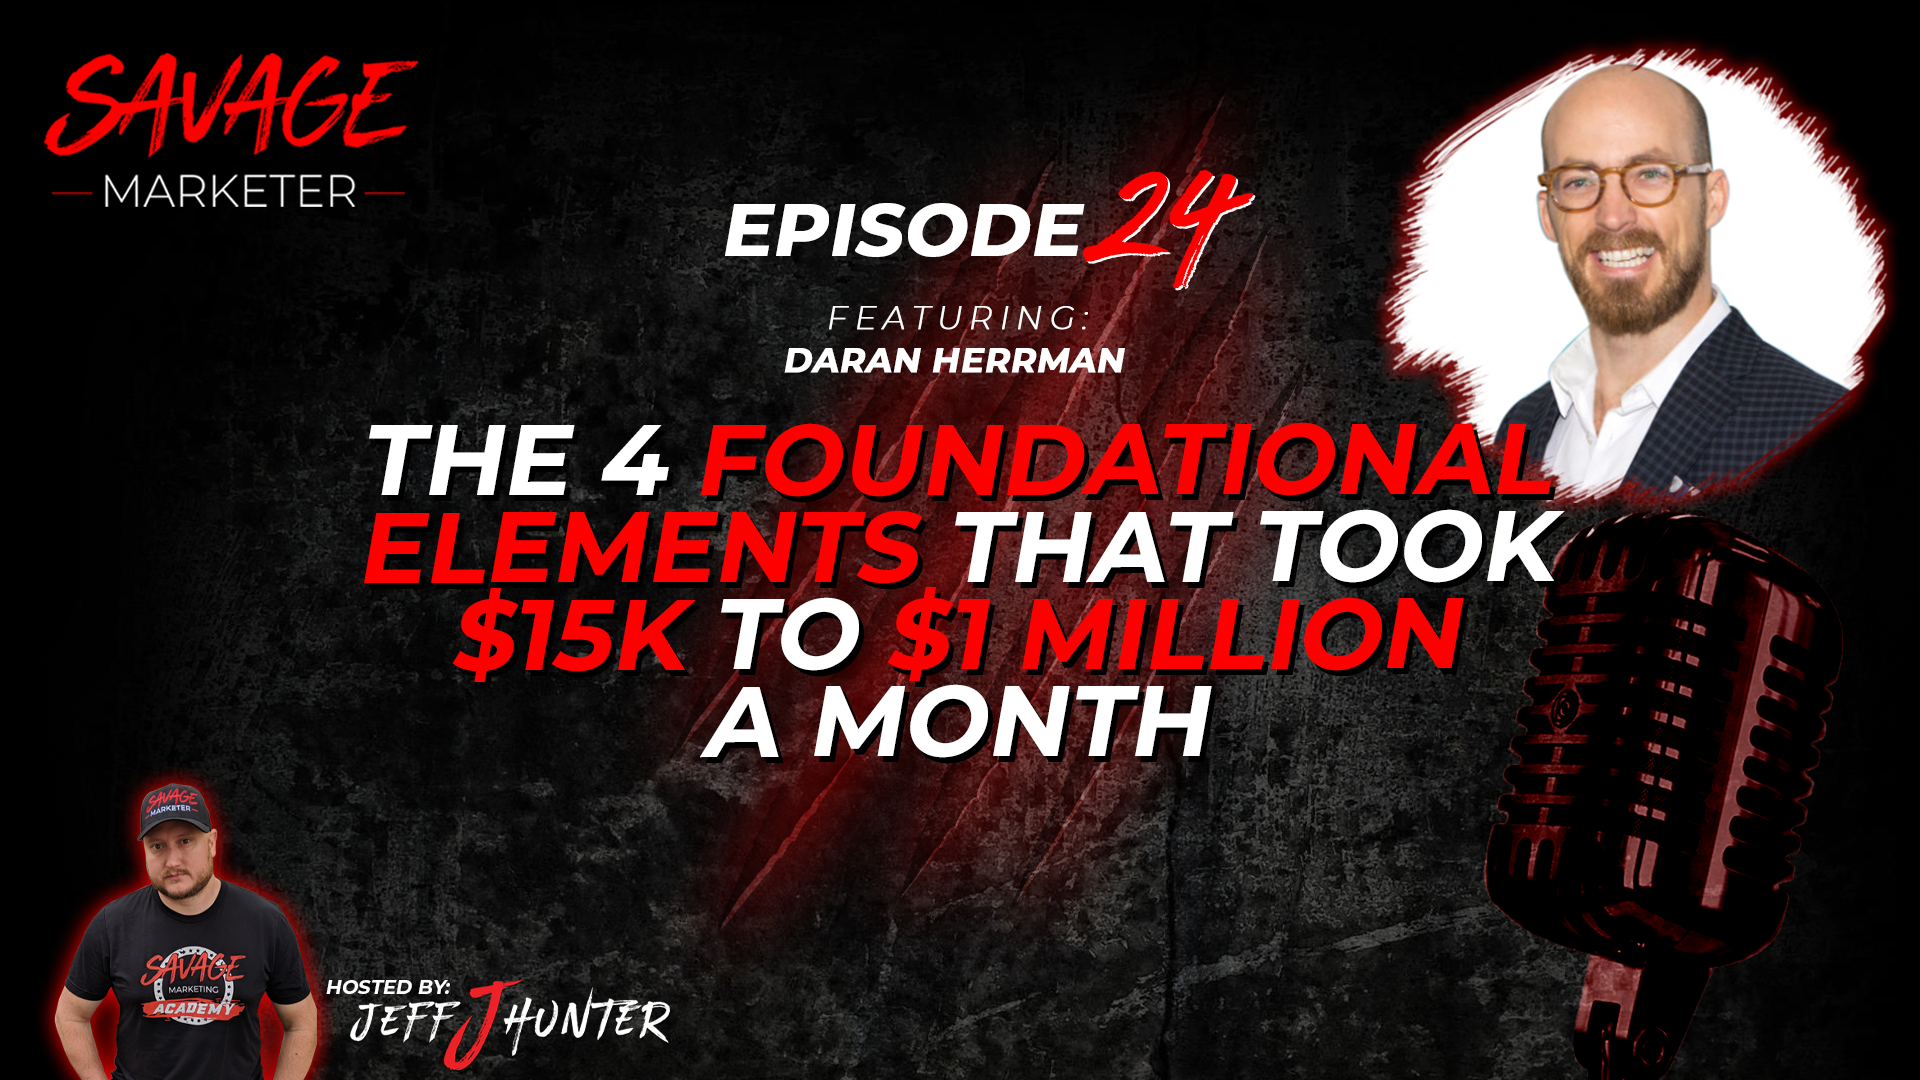 the 4 foundational elements that took 15k to $1 million a month Daran Herrman